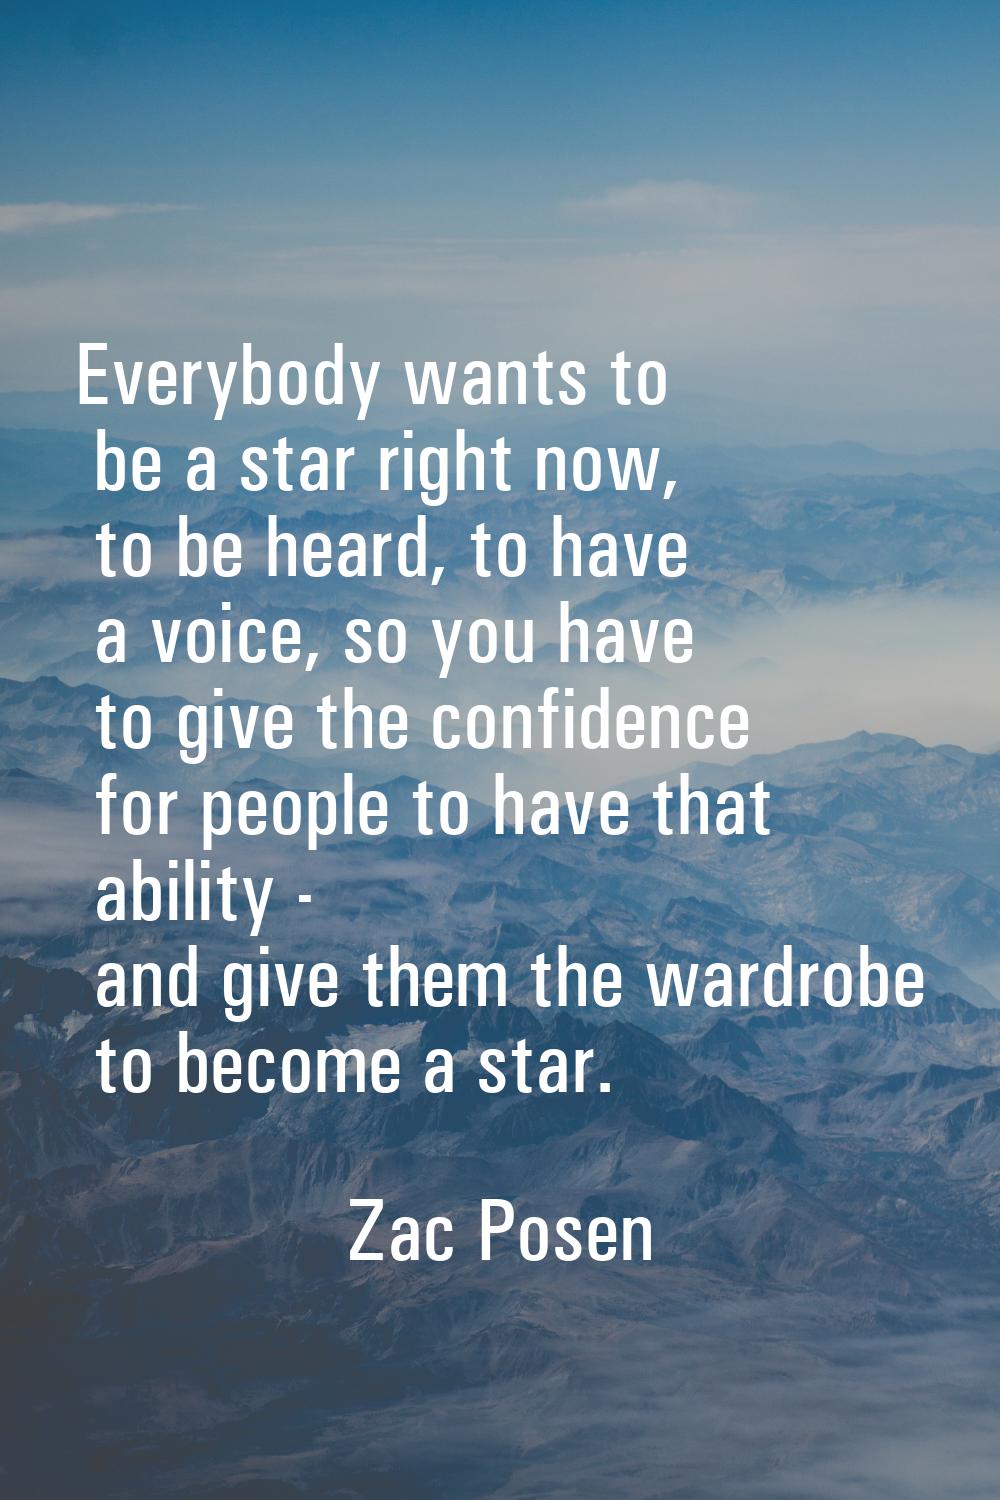 Everybody wants to be a star right now, to be heard, to have a voice, so you have to give the confi